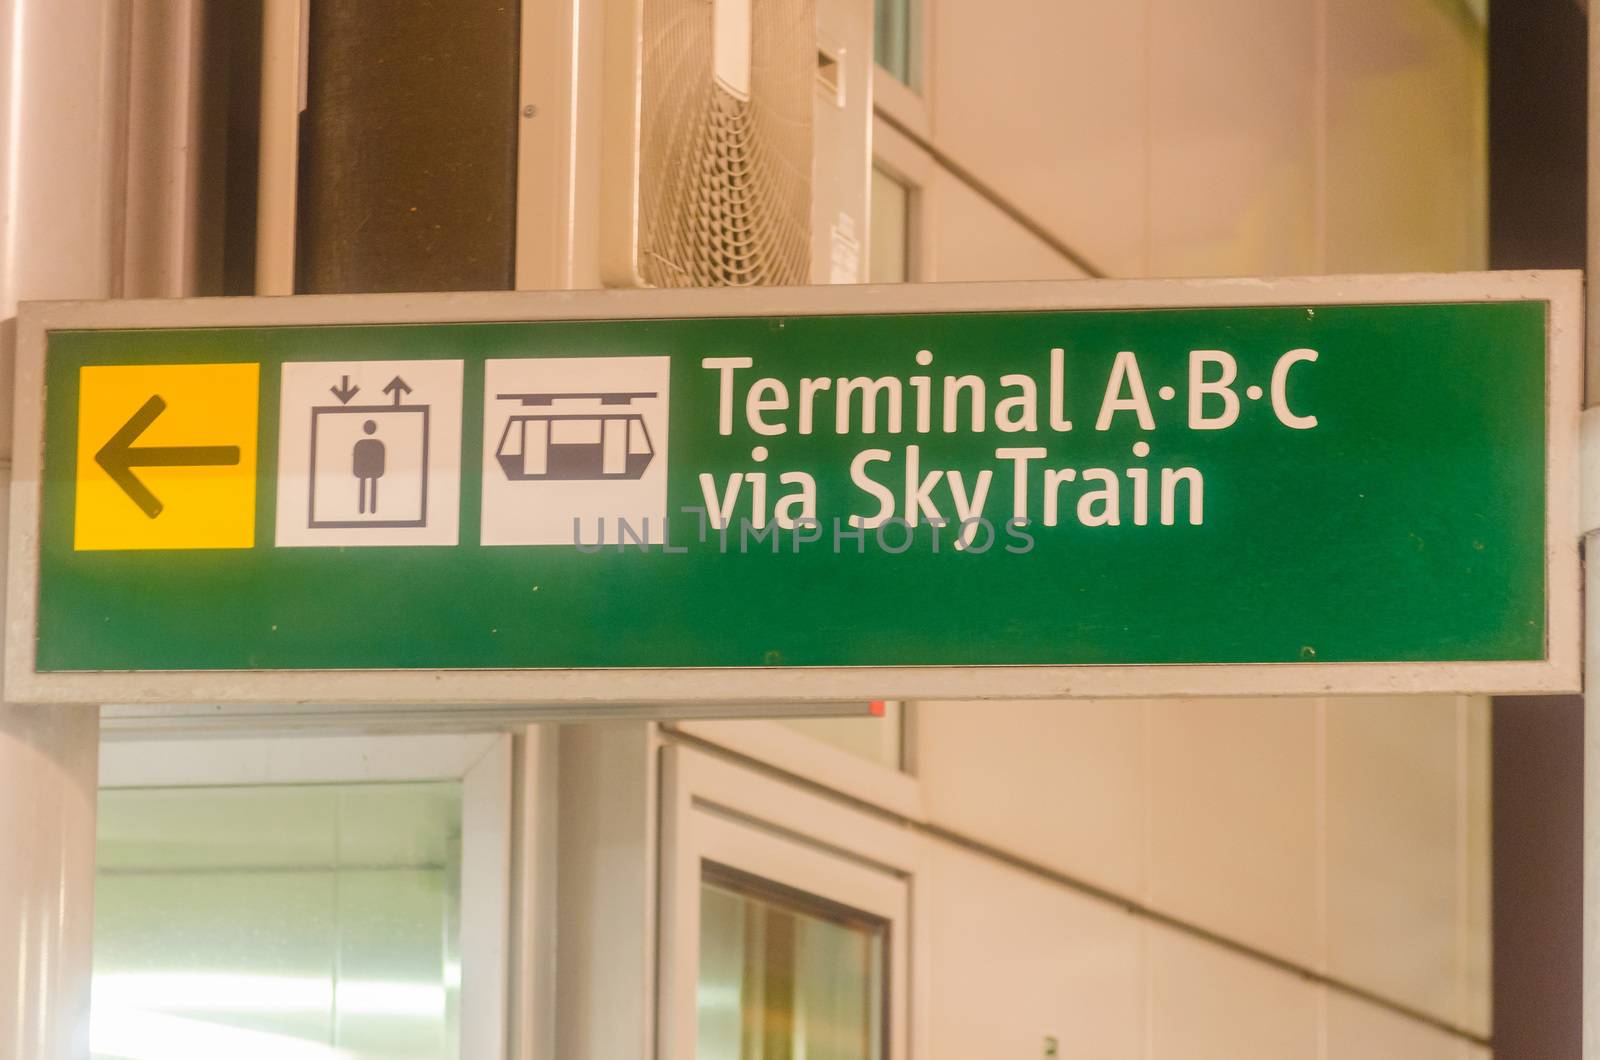 Information sign at the airport.